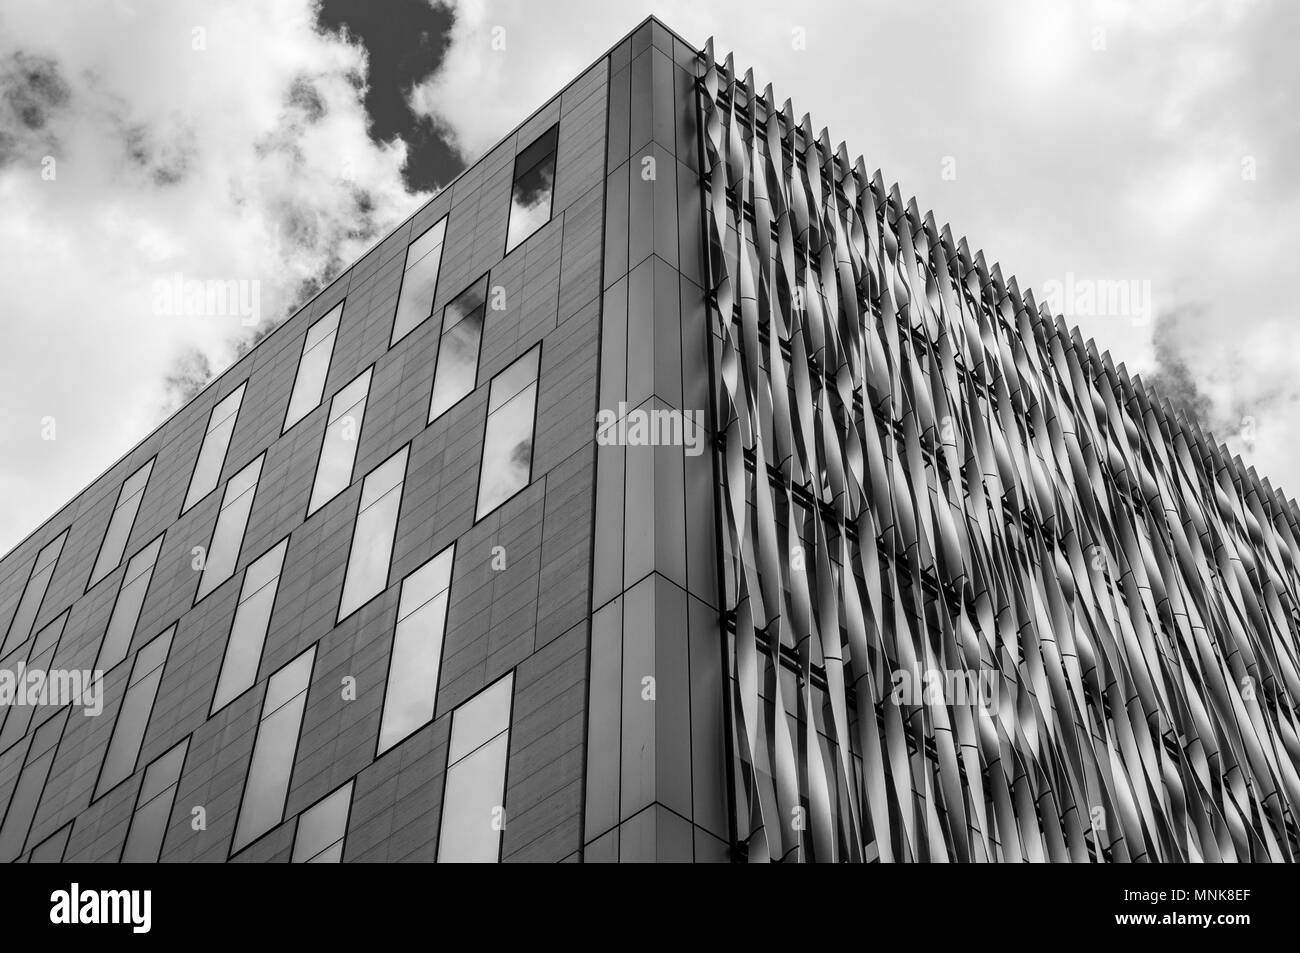 A black and white image looking up at a modern city office building against a cloudy sky in London Stock Photo